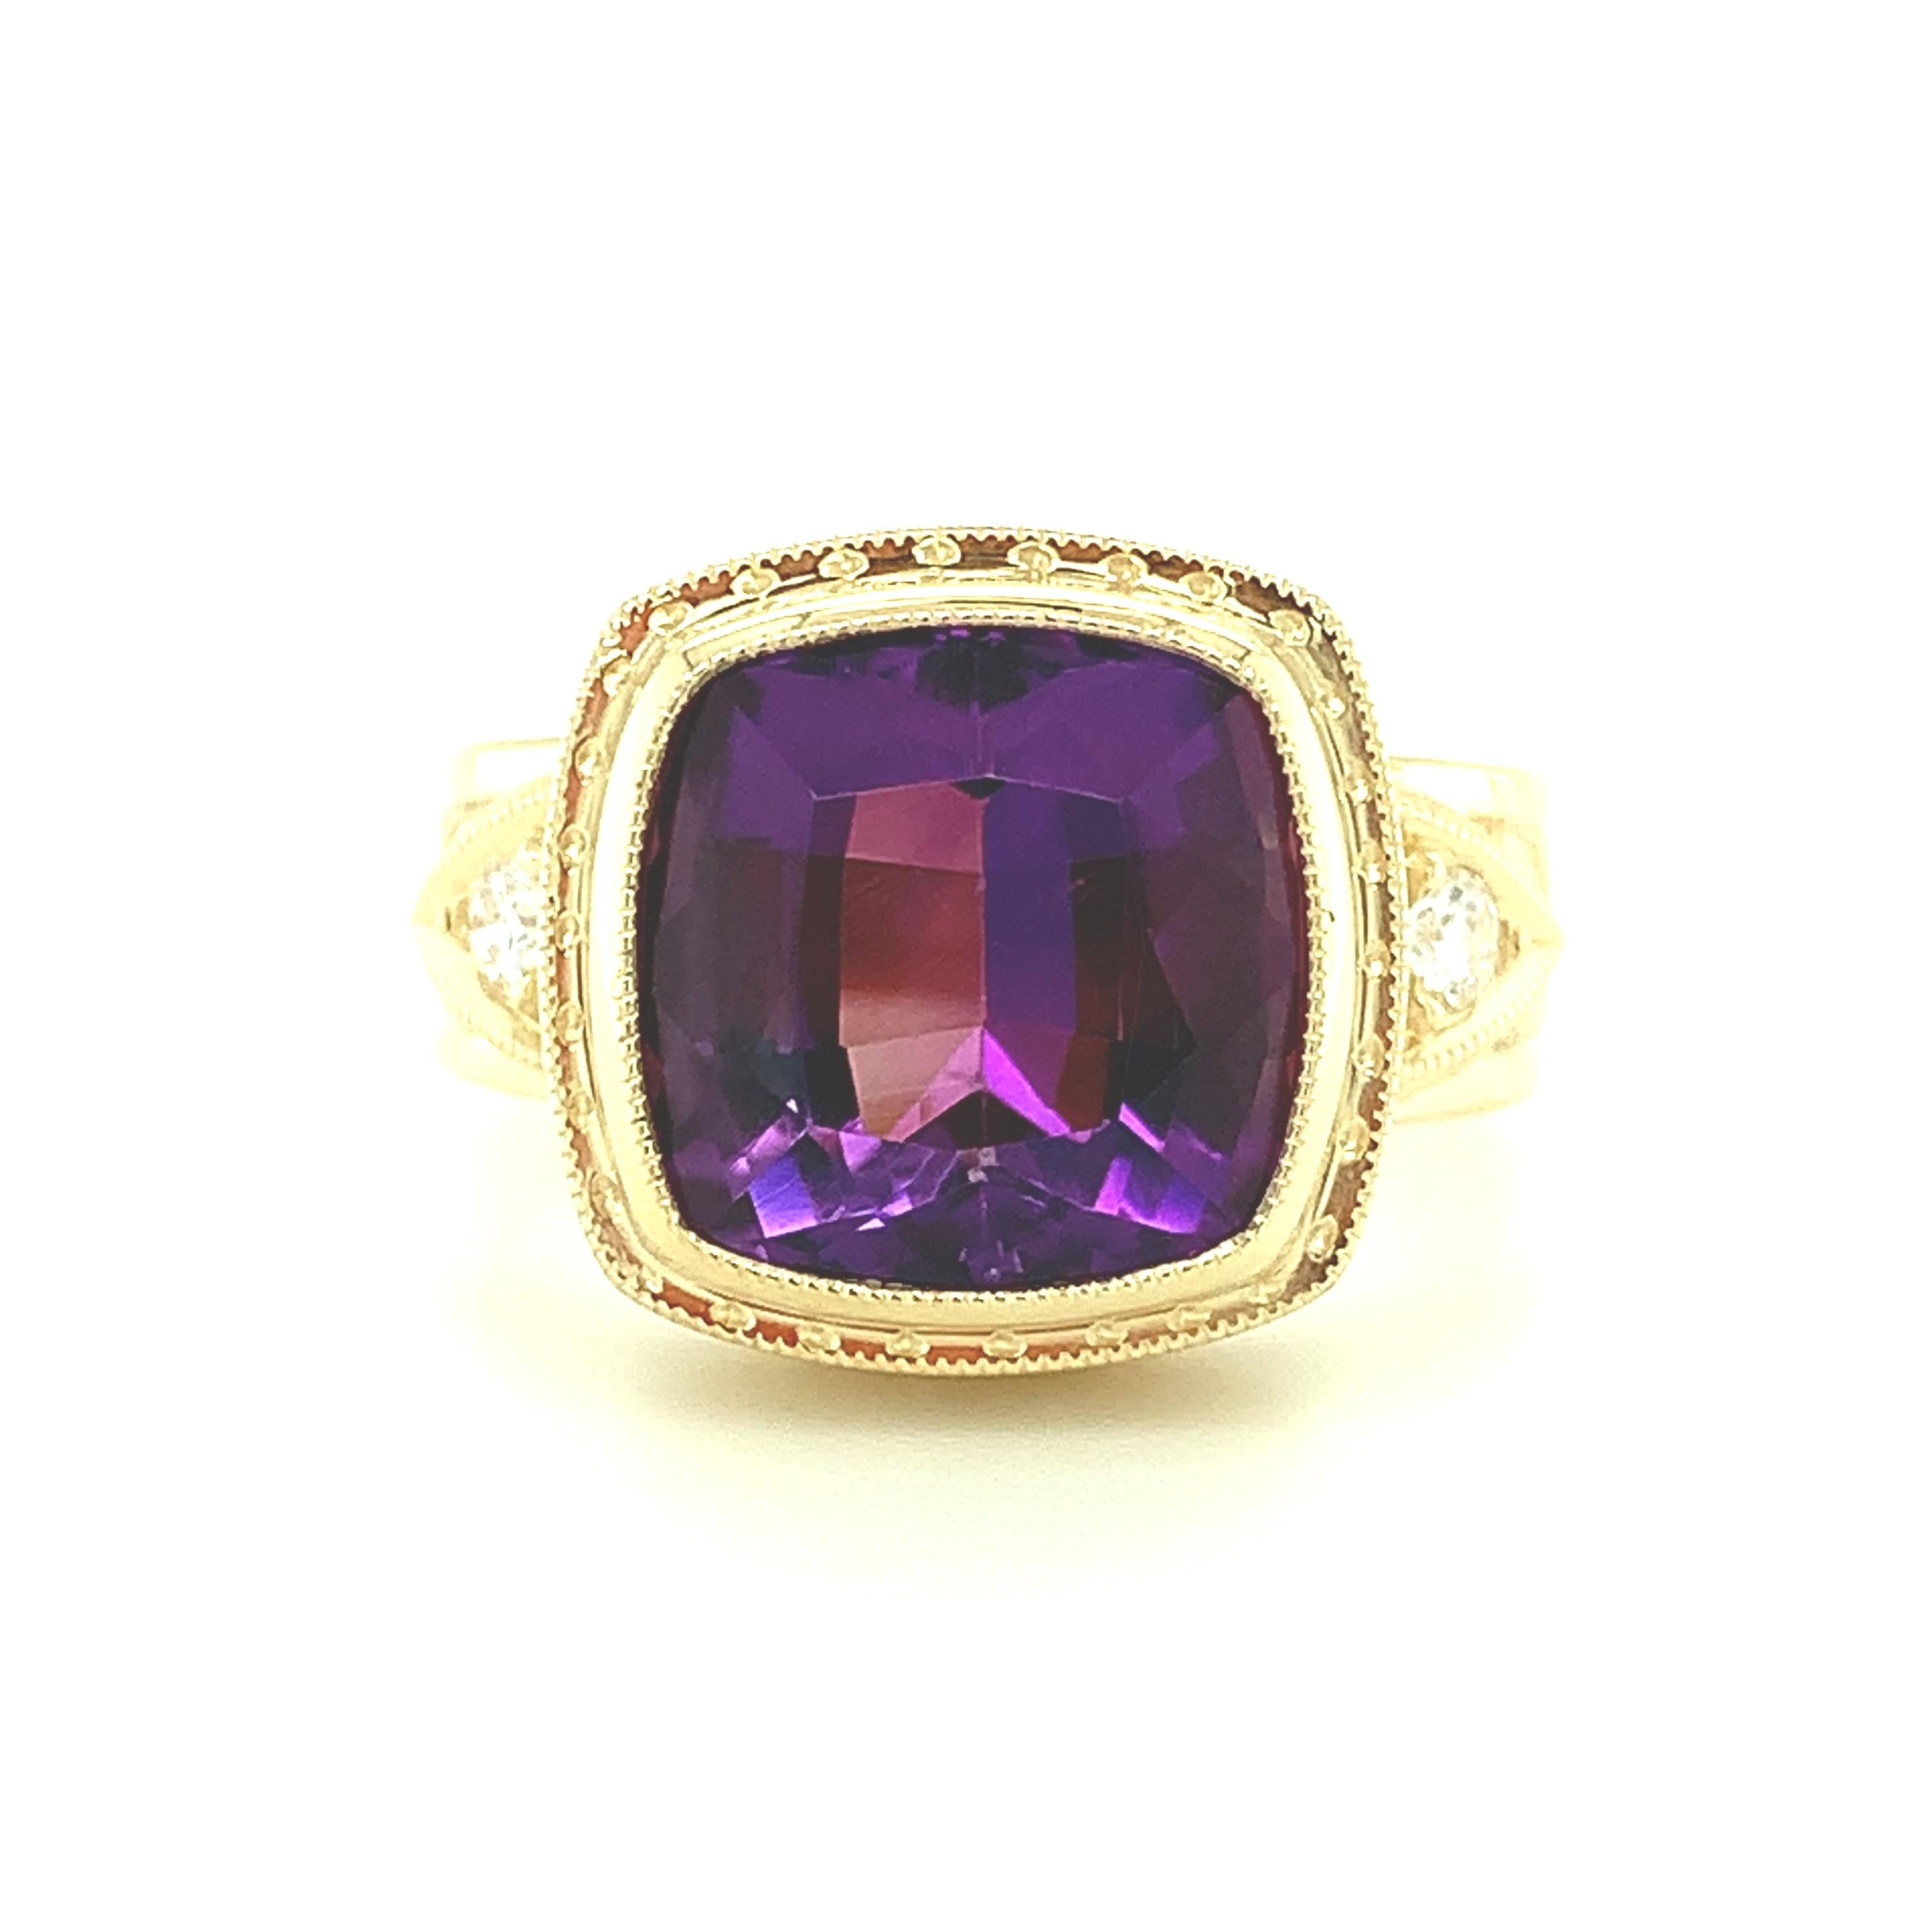 This beautiful ring features a lovely lavender color amethyst that has been set in a handmade 18k yellow gold bezel. The cushion-shaped gemstone has beautifully rich color and is accented by two sparkling, round brilliant white diamonds. The sides